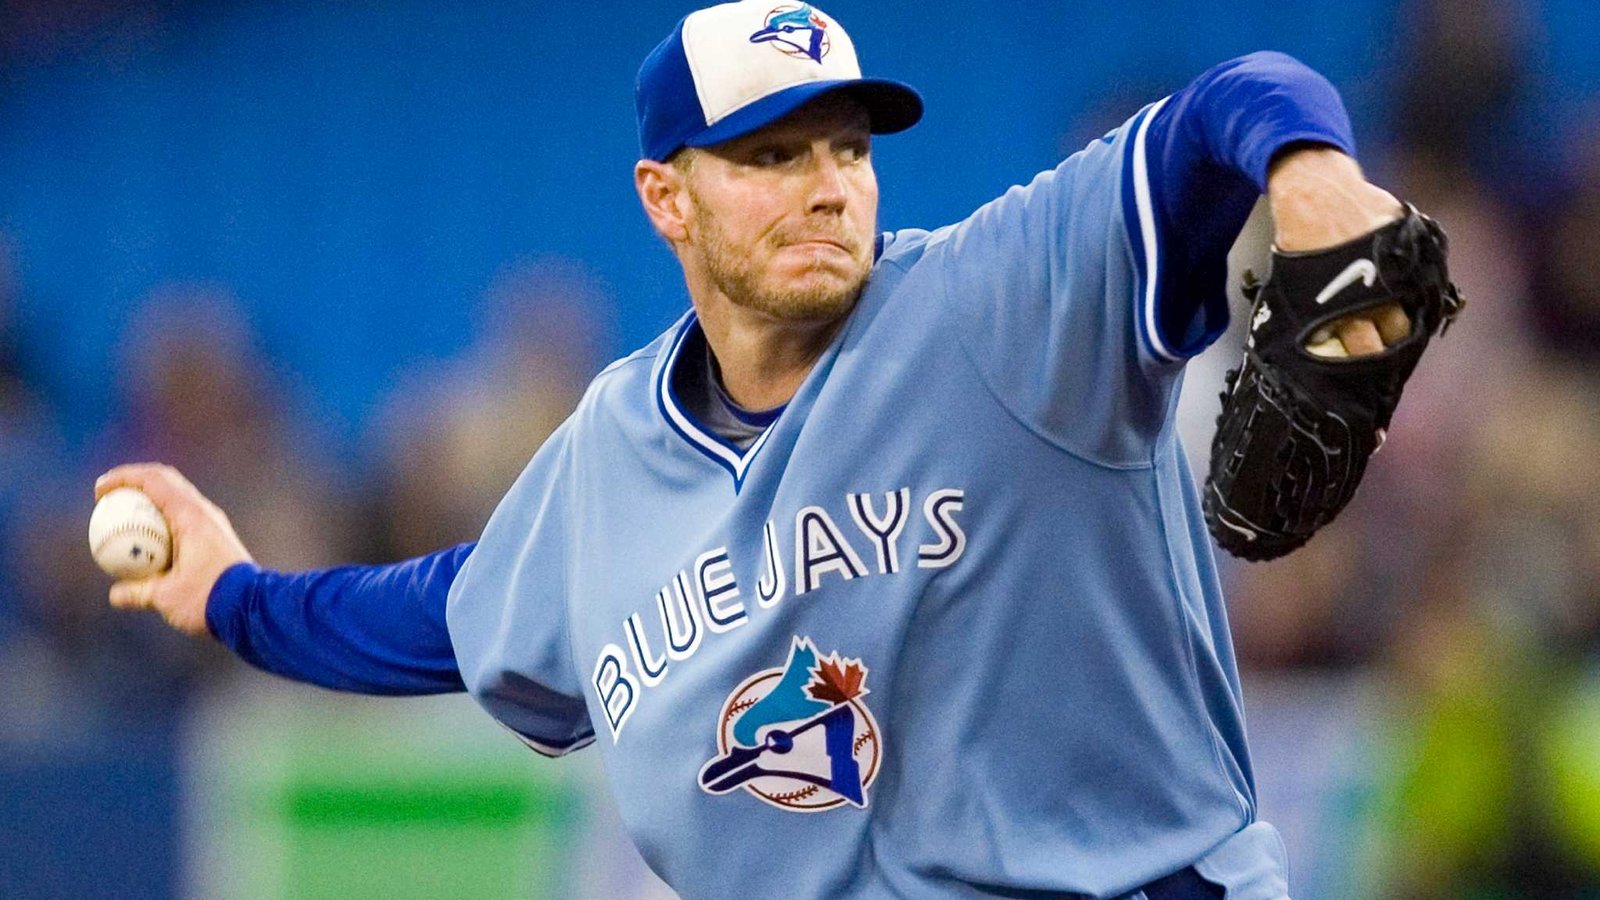 Breaking: Plane registered to former Blue Jays star Roy Halladay has crashed. 